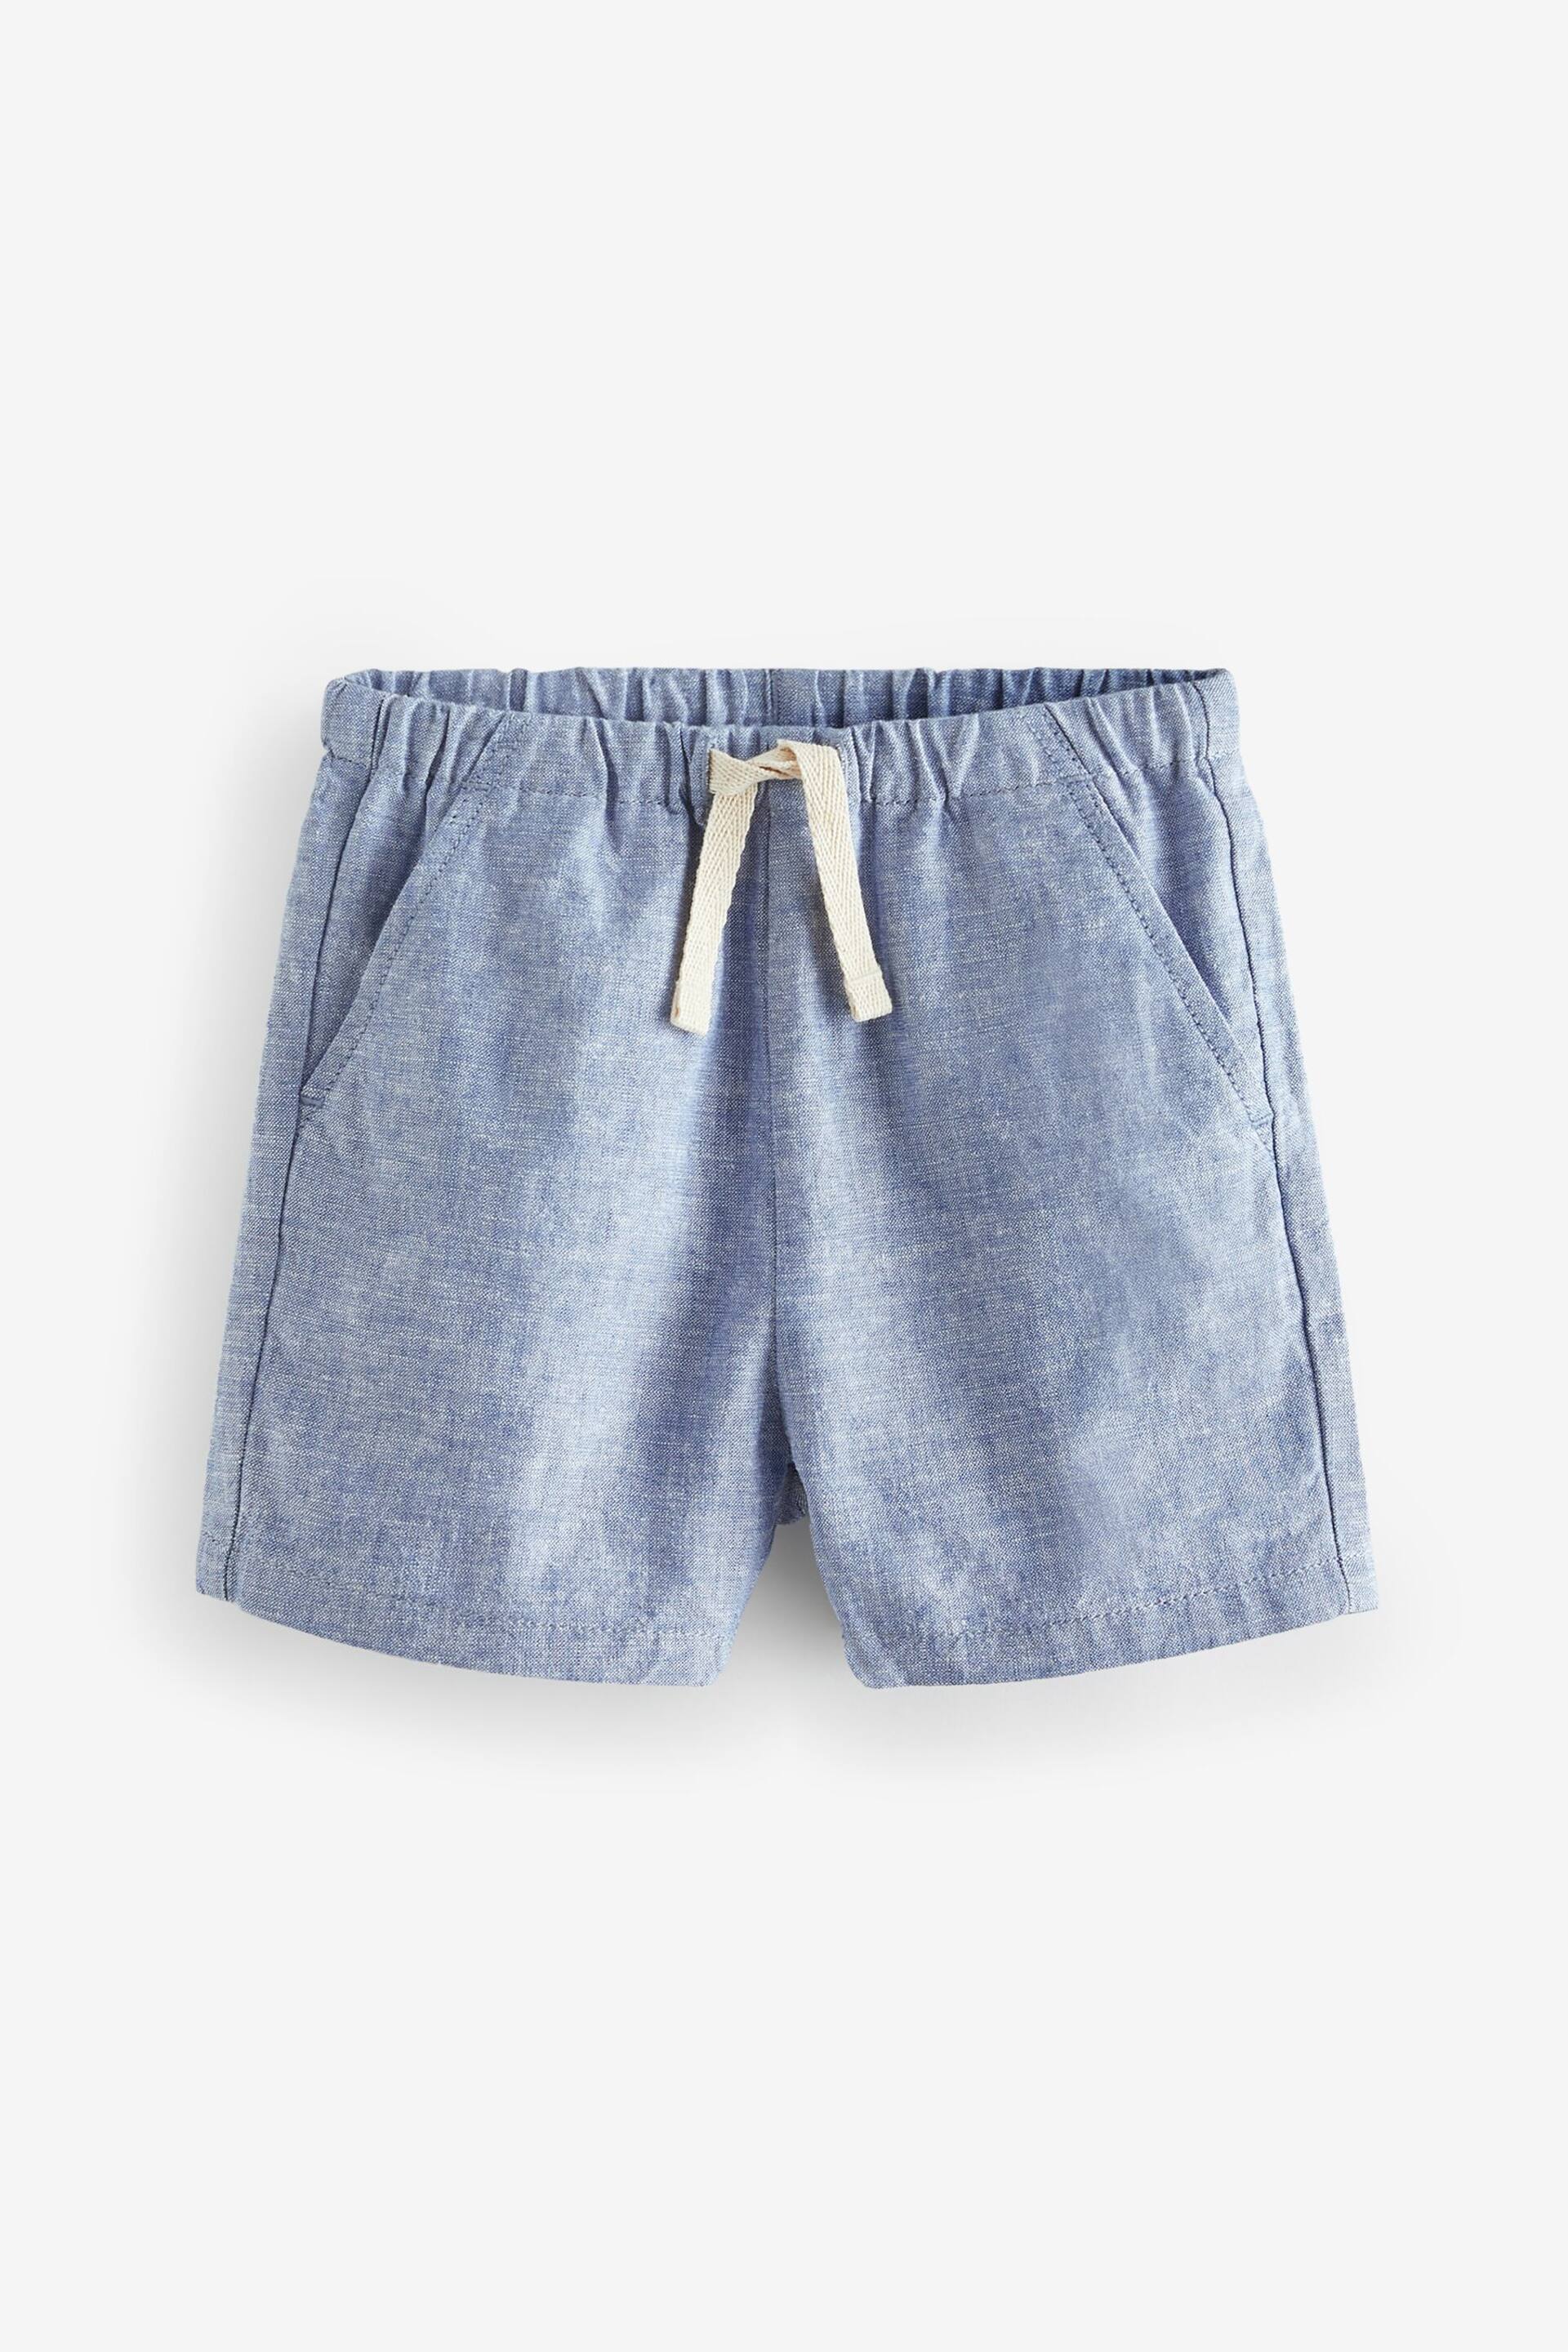 Chambray Blue Linen Blend Pull-On Shorts (3mths-7yrs) - Image 4 of 6